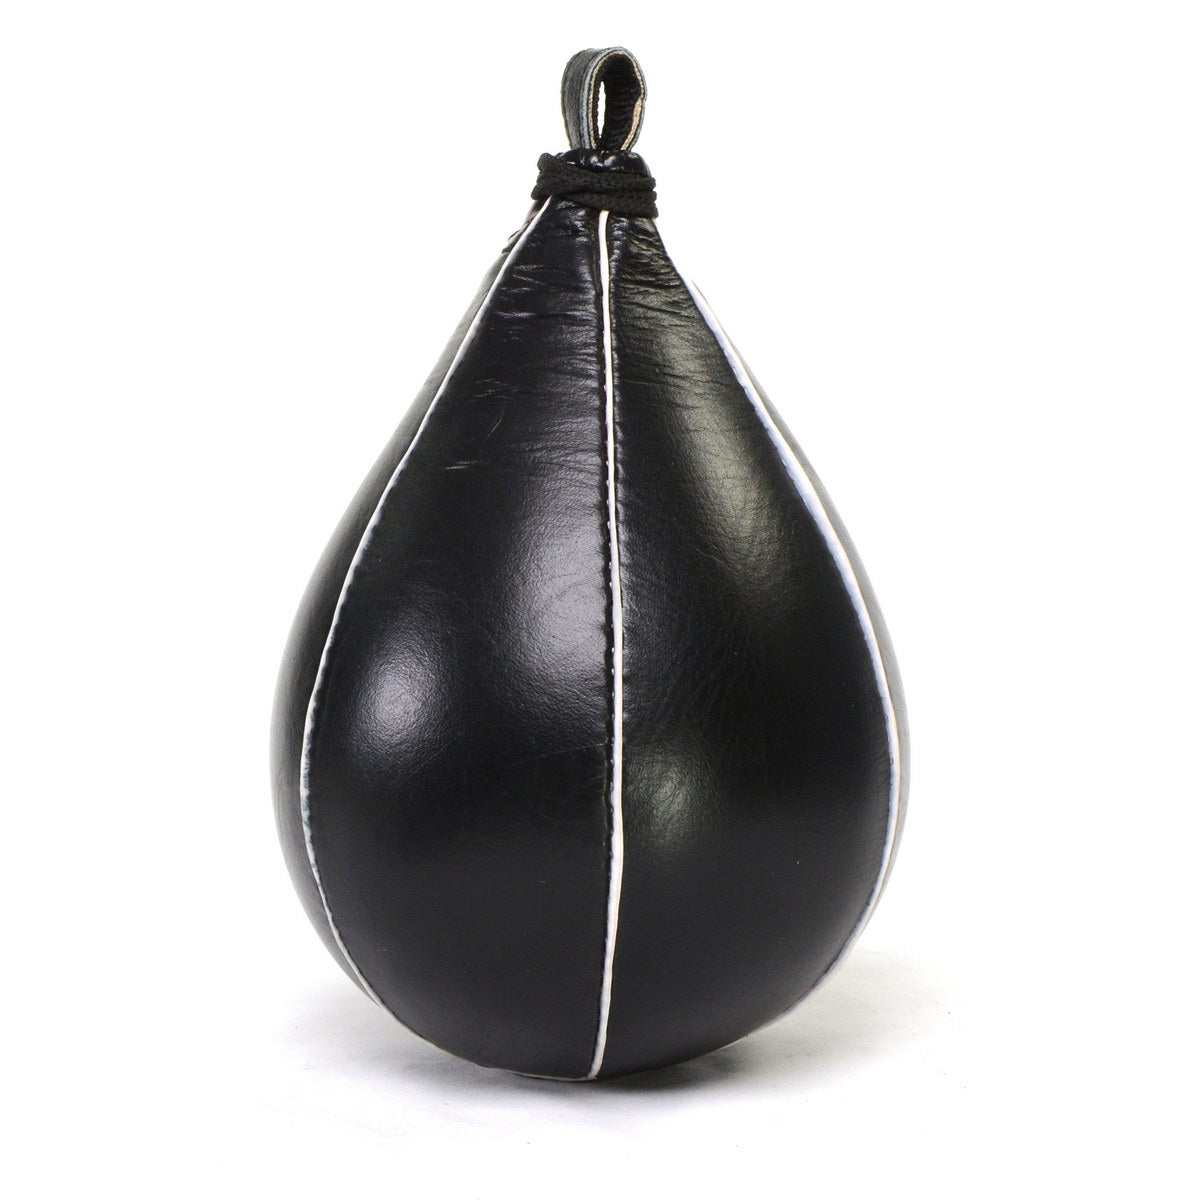 X Fitness XF8003 Speed Ball Boxing Cow Hide Leather MMA Speed Bag Muay Thai Training Speed Bag Punching Dodge Striking Bag Kit with Hanging Swivel for Workout-BLACK